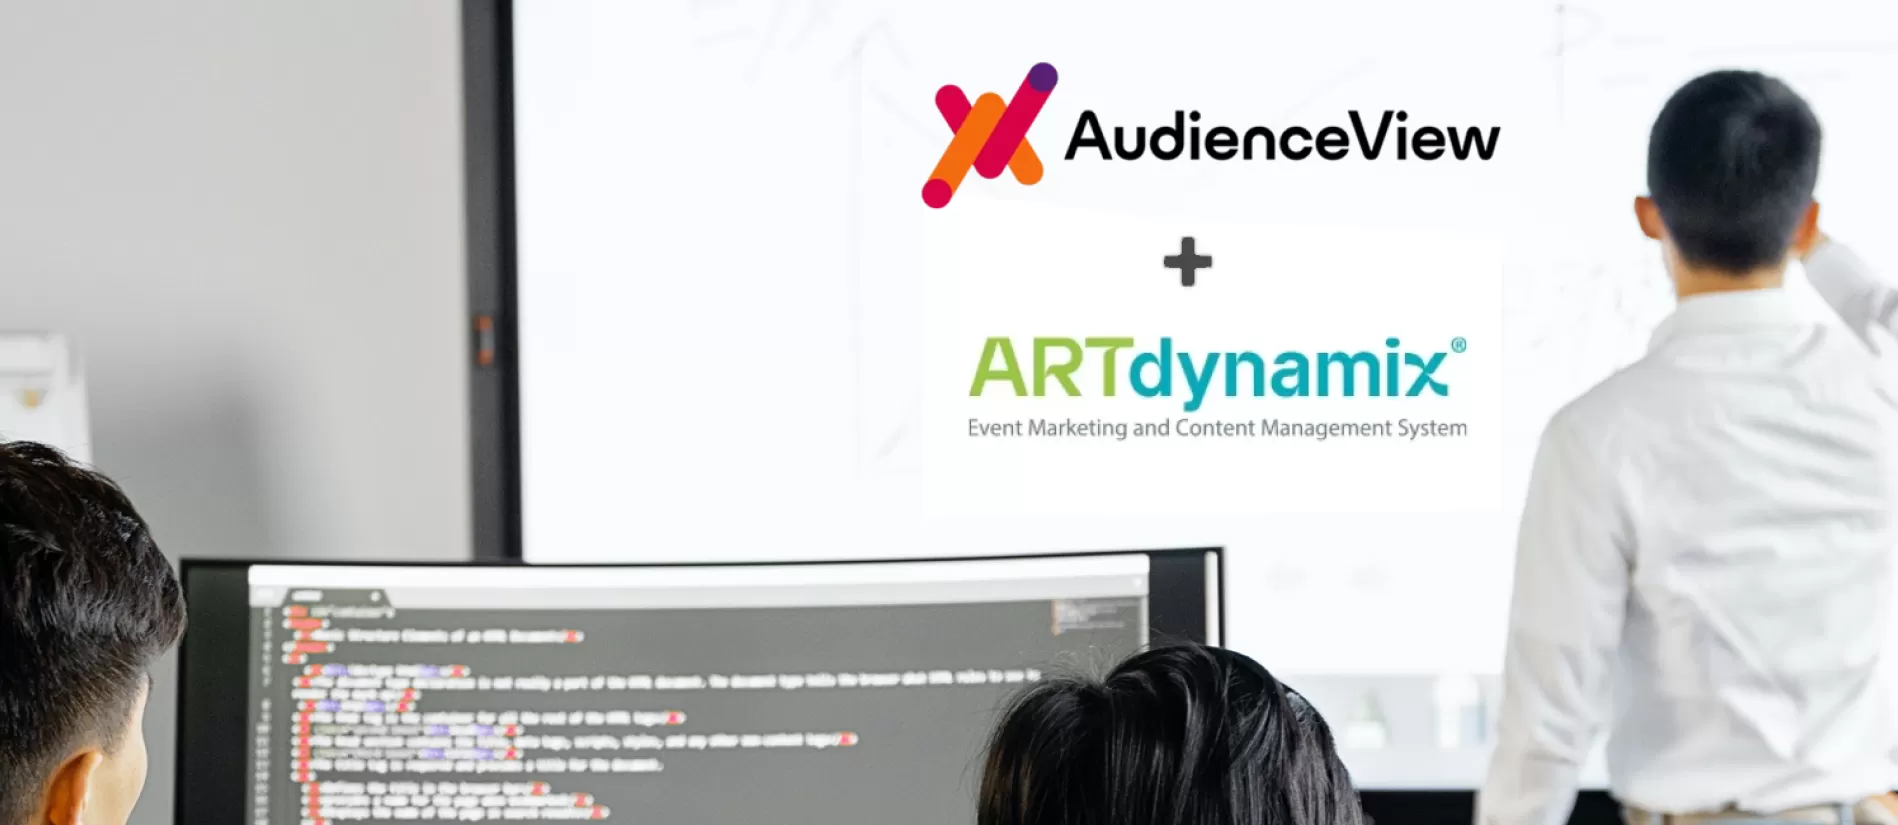 ARTdynamix and audience view is a perfect combination